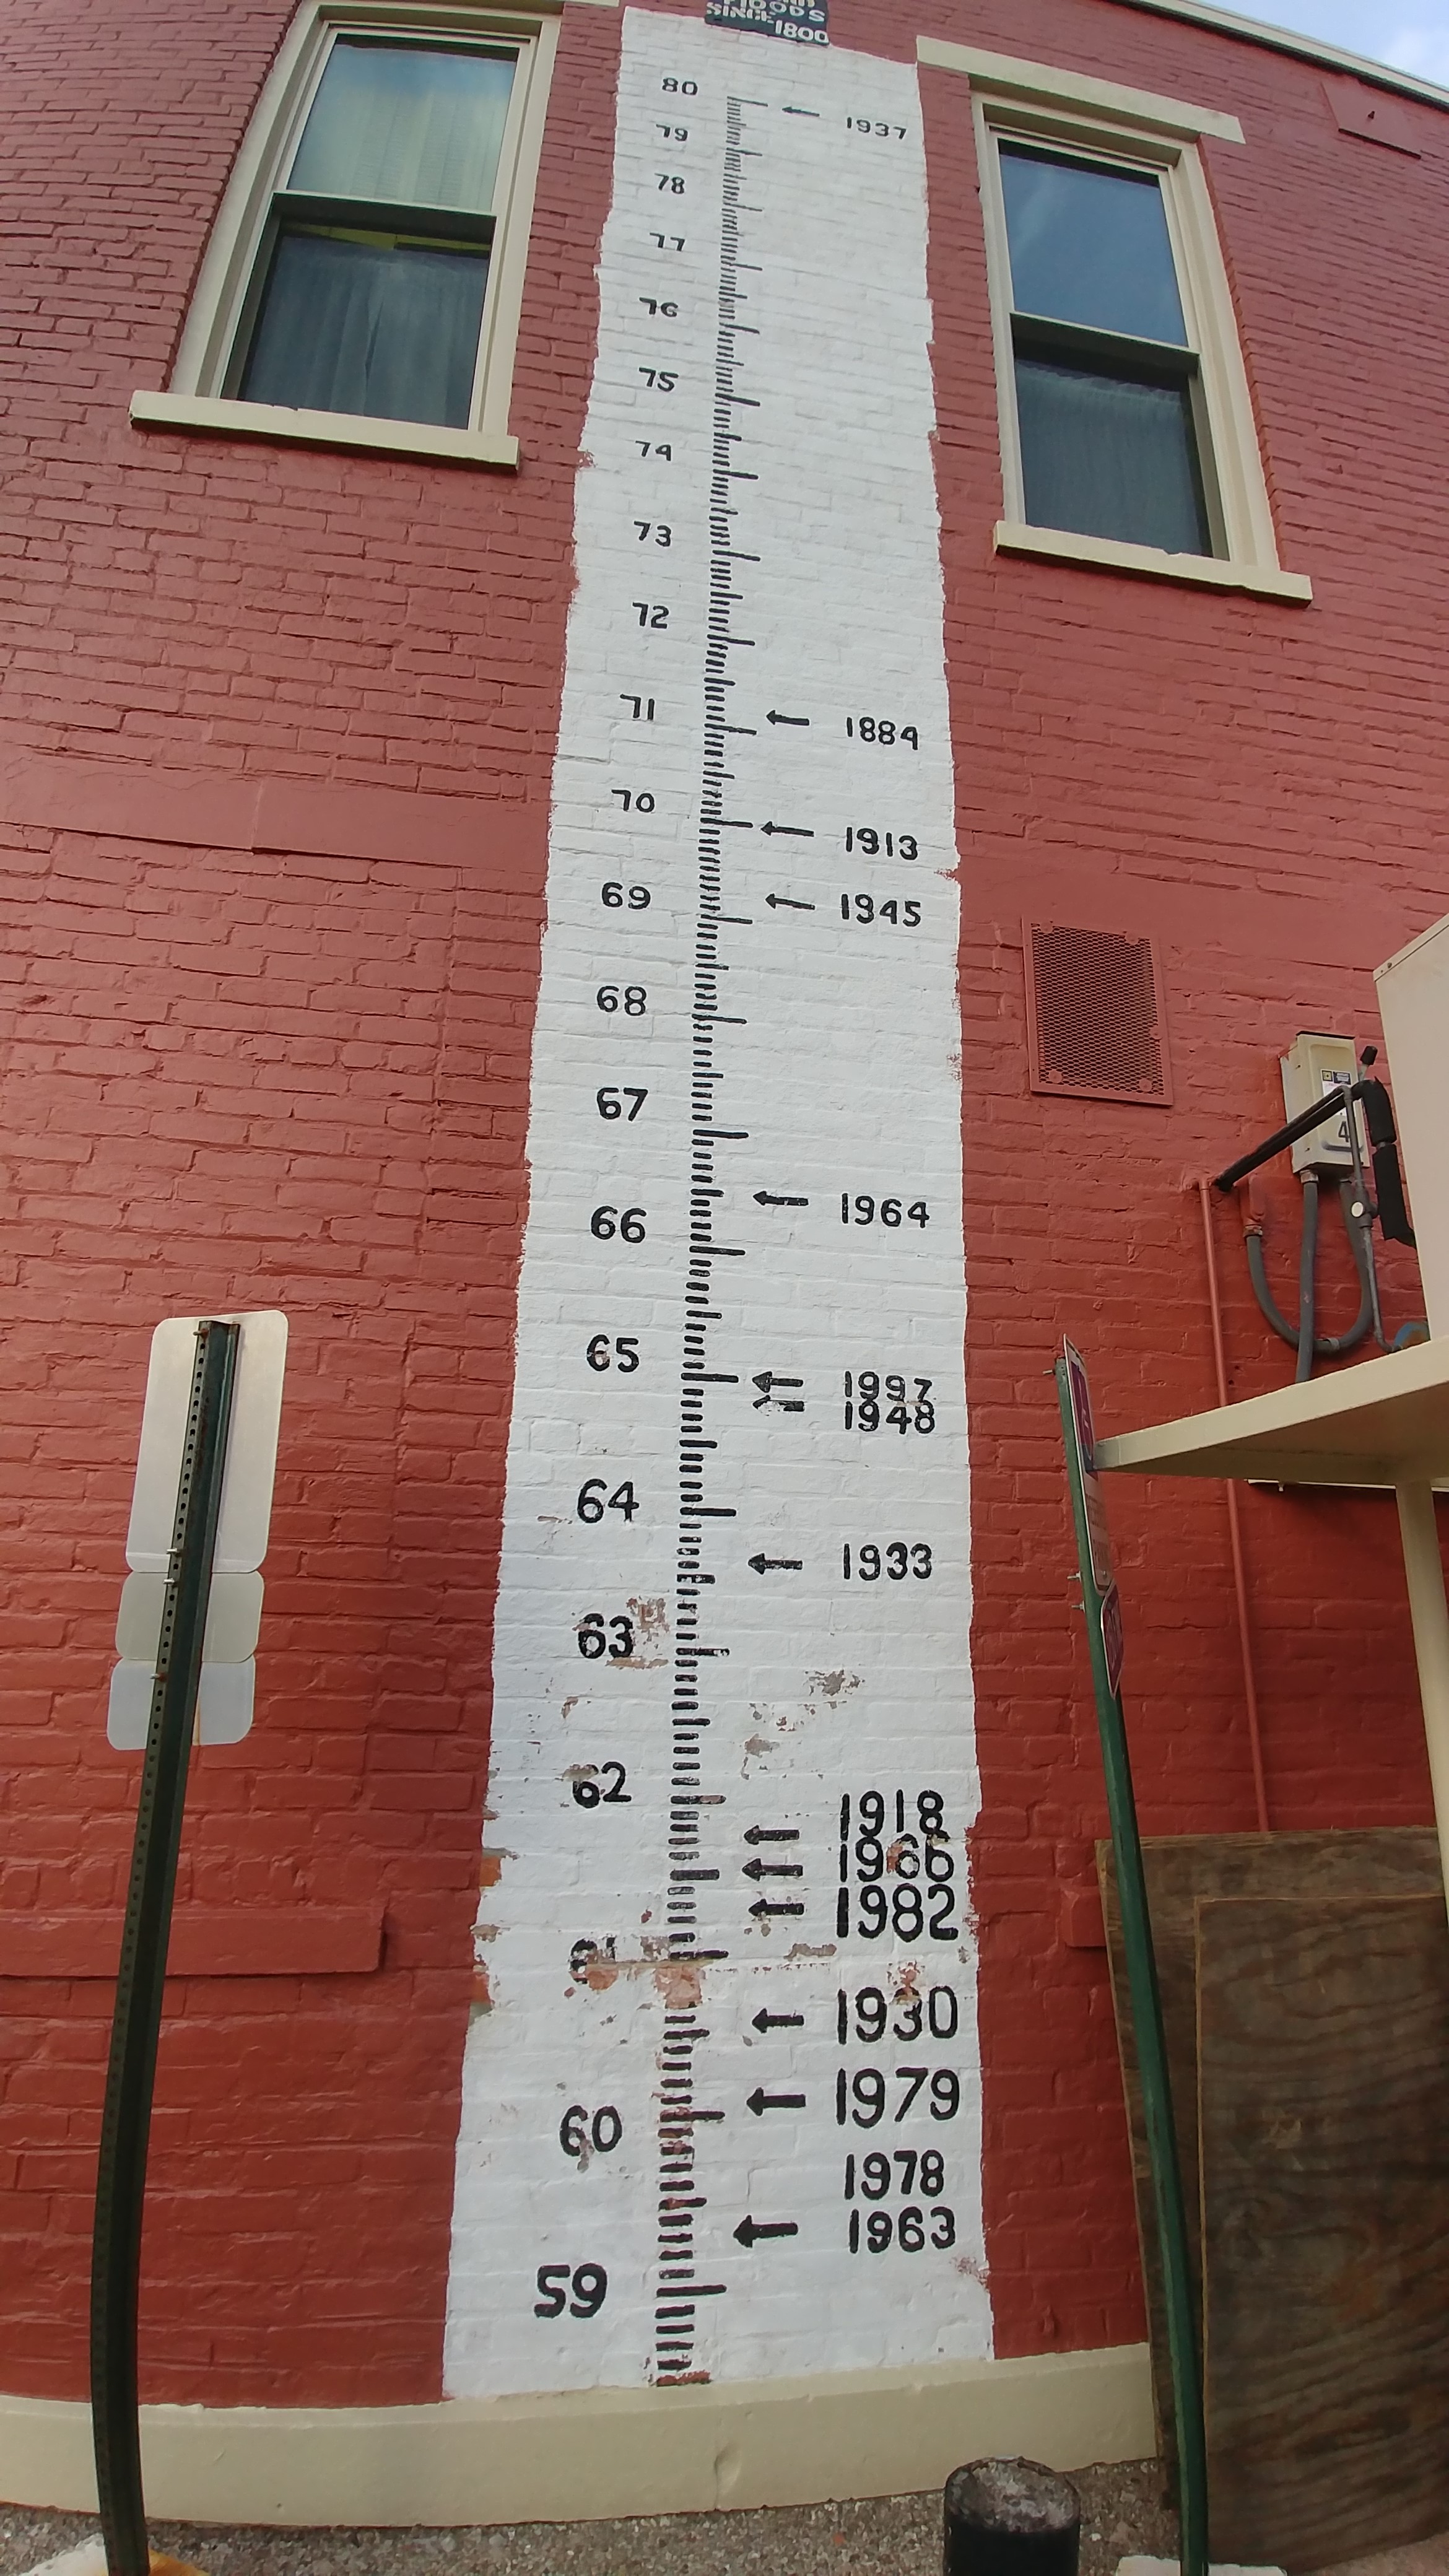 The iconic Flood Gauge at St. Rose Church. As of today, no floodwaters have reached the gauge. Check out 1937 at the top. Can you even imagine? (CT Photo/Greg Hartman)